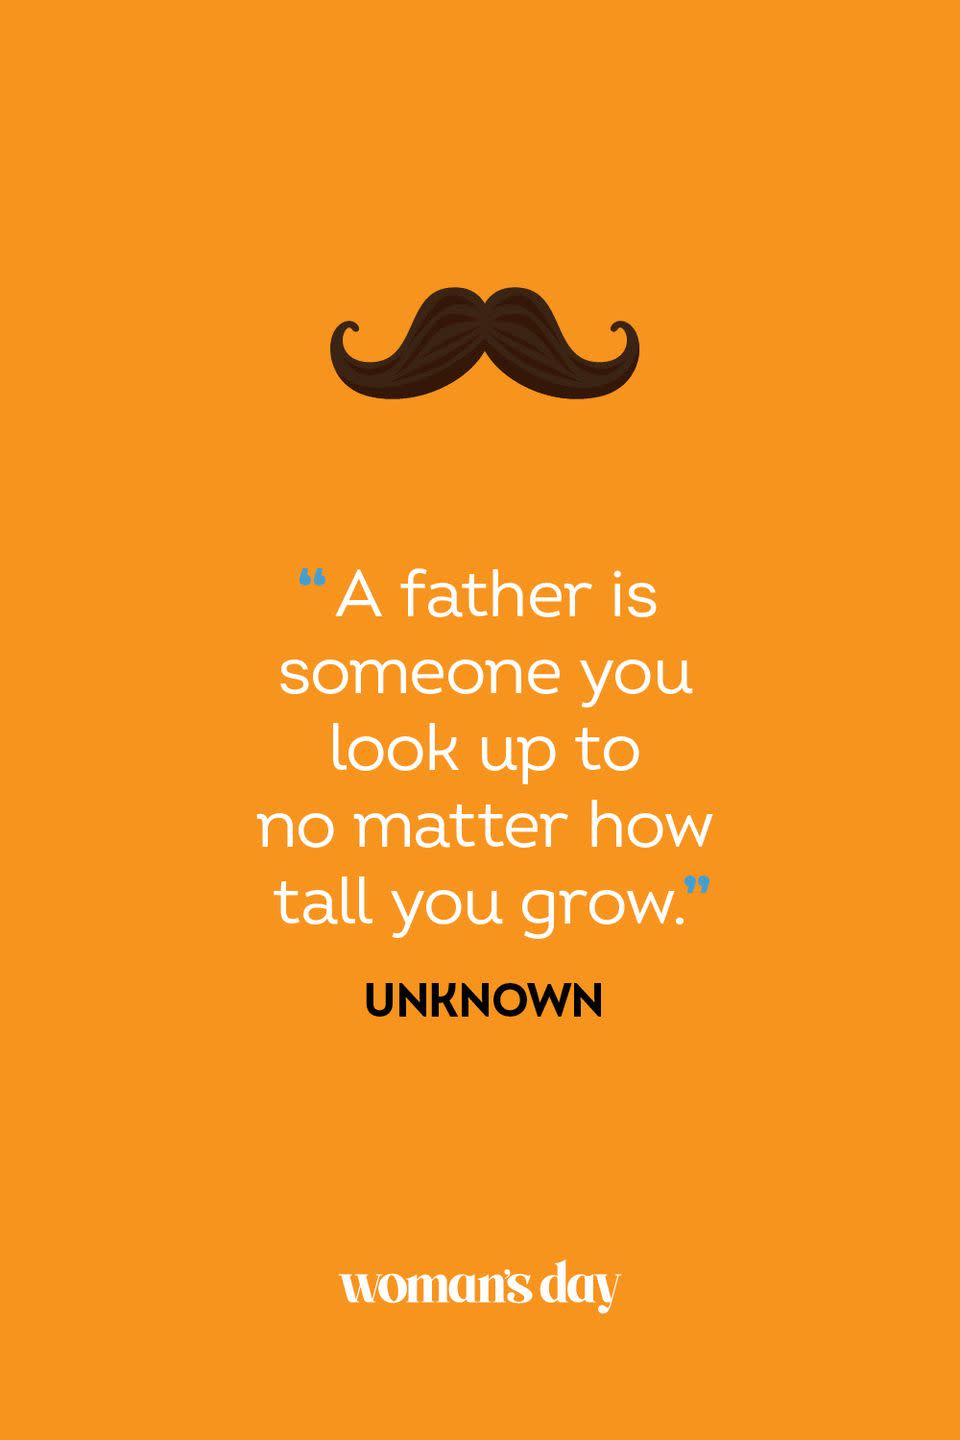 fathers day quotes unknown